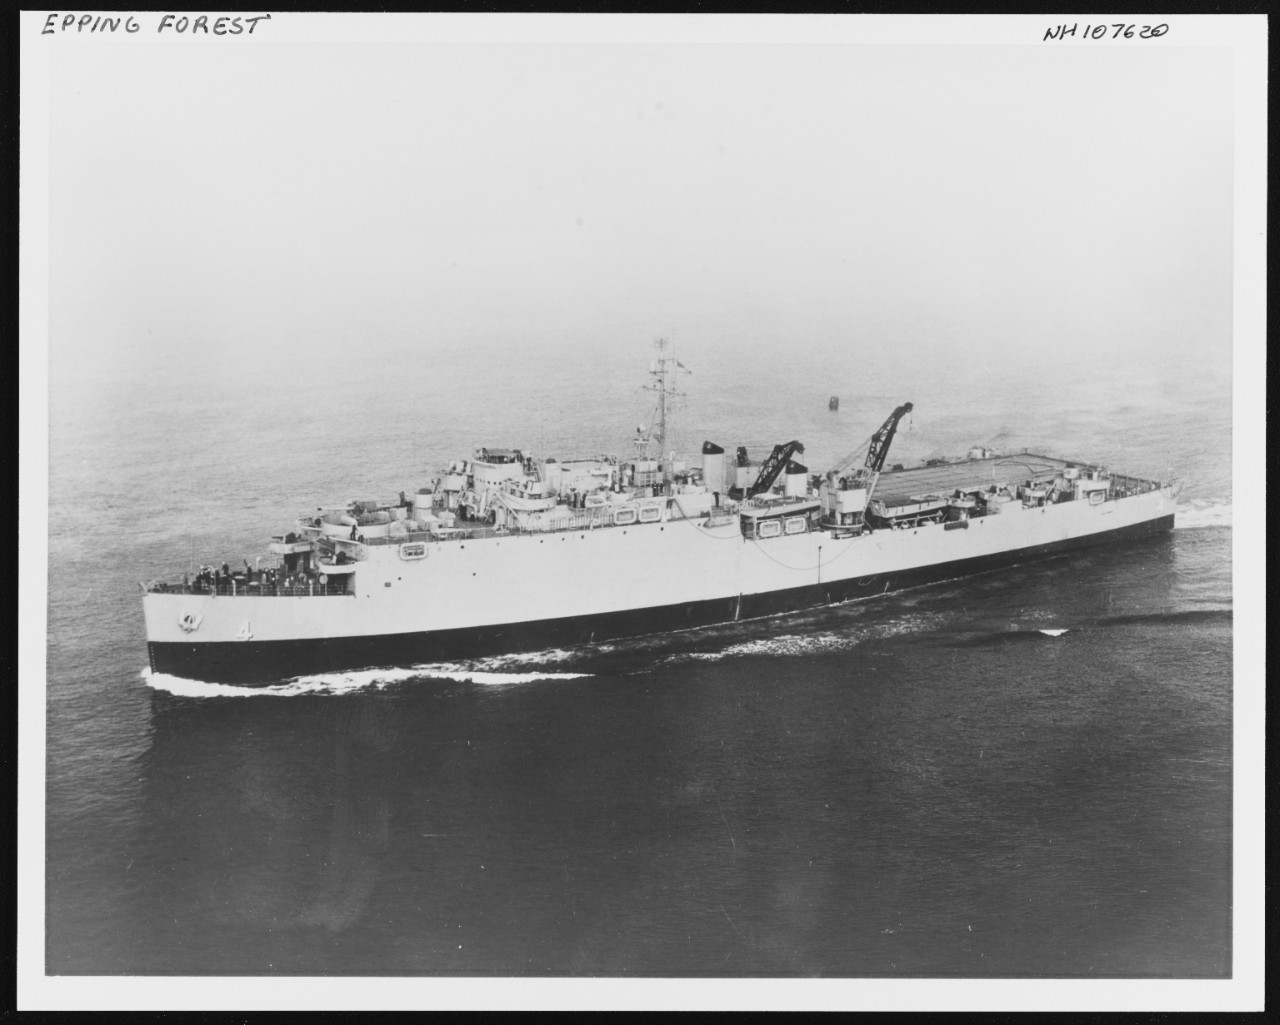 Photo #: NH 107620  USS Epping Forest